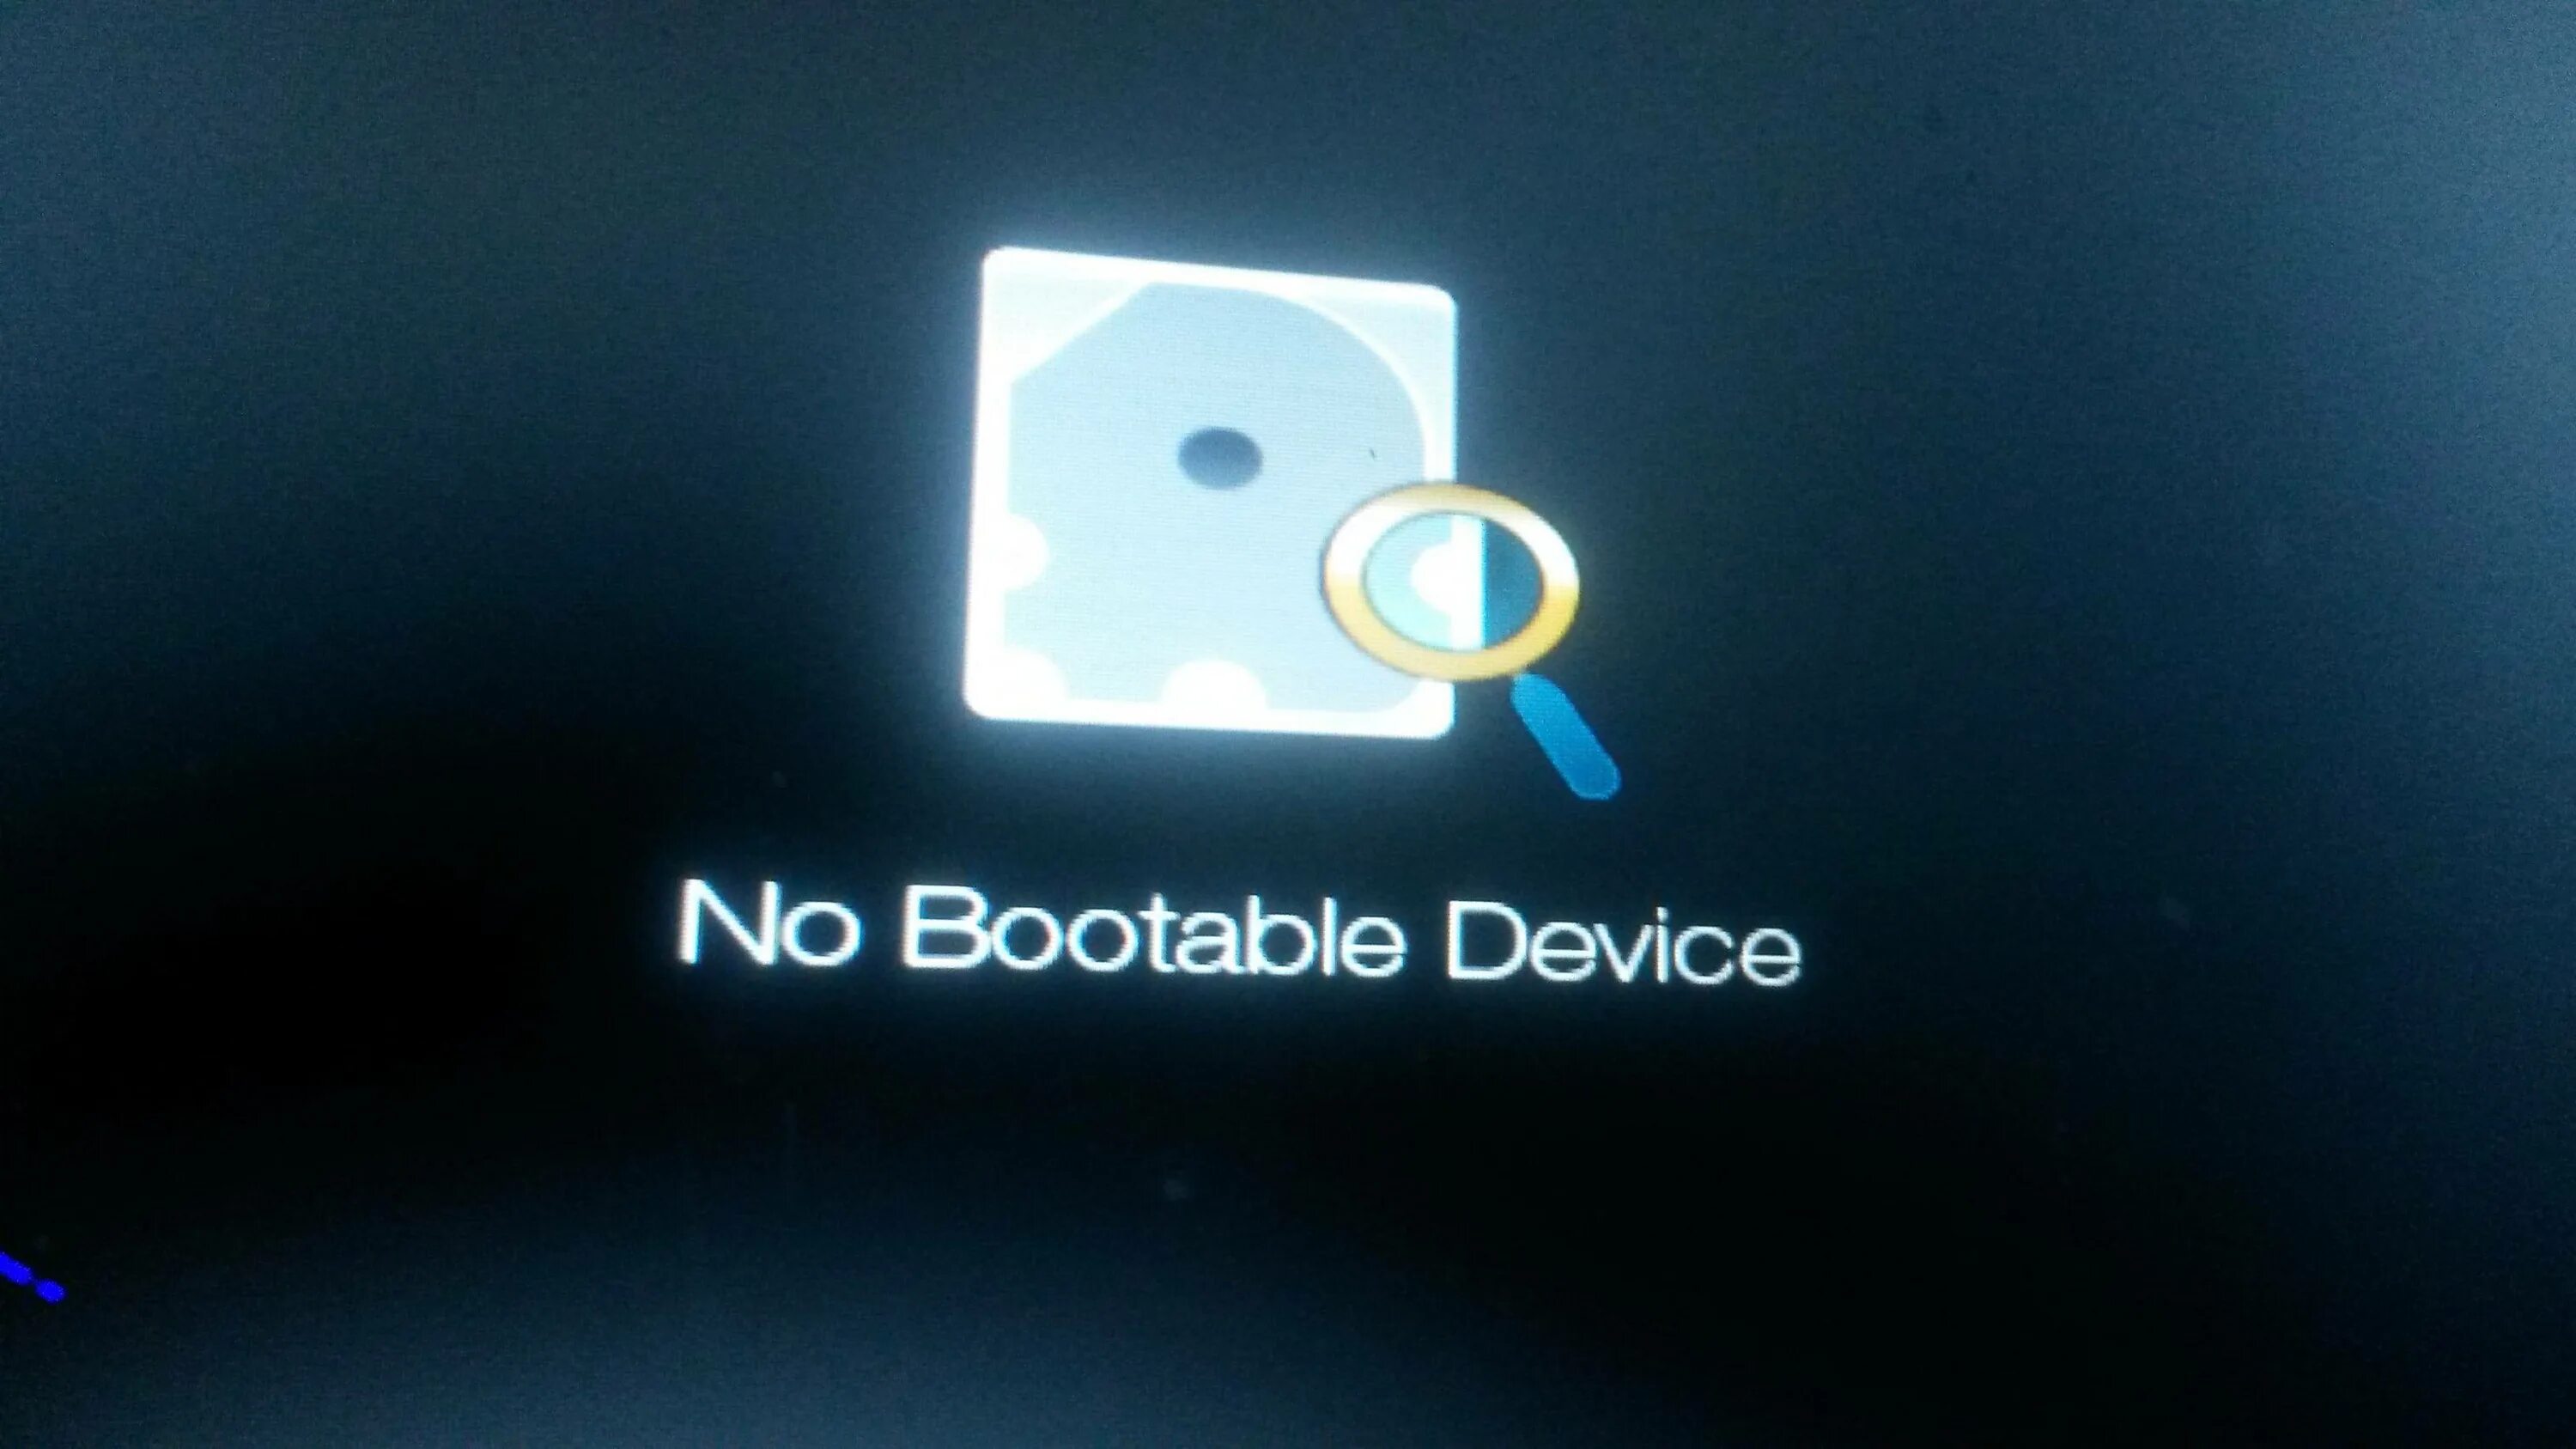 No Bootable device Acer. No Bootable device на ноутбуке. No Bootable device на ноутбуке Acer. No Bootable device на ноутбуке Acer Windows 10. No booting device ноутбук